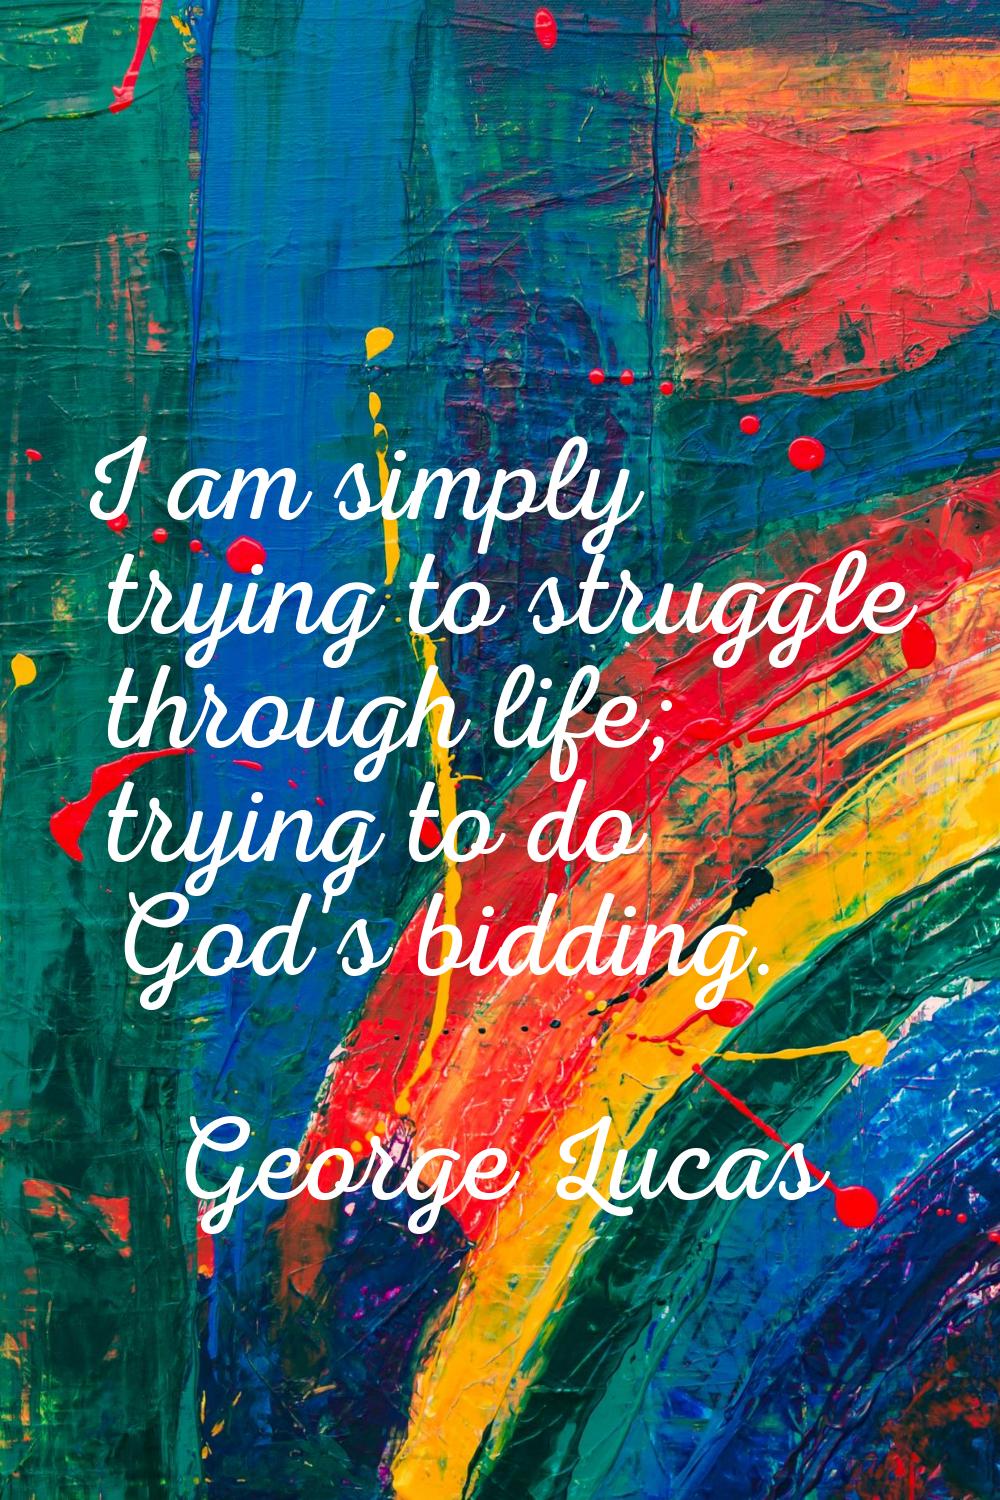 I am simply trying to struggle through life; trying to do God's bidding.